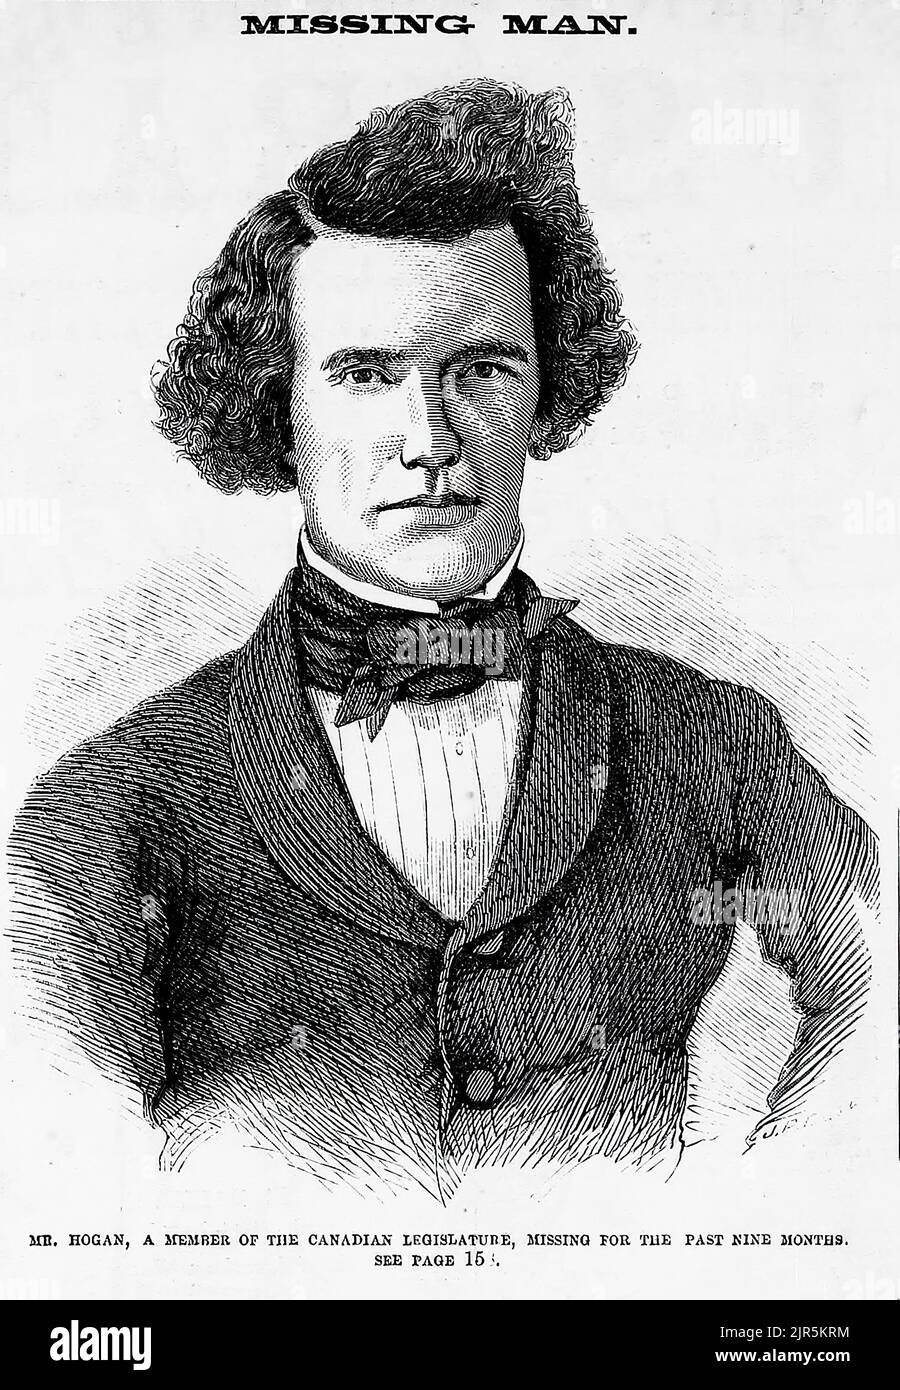 Portrait of John Sheridan Hogan, a member of the Canadian Legislature, missing for the past nine months. July 1860. 19th century illustration from Frank Leslie's Illustrated Newspaper Stock Photo